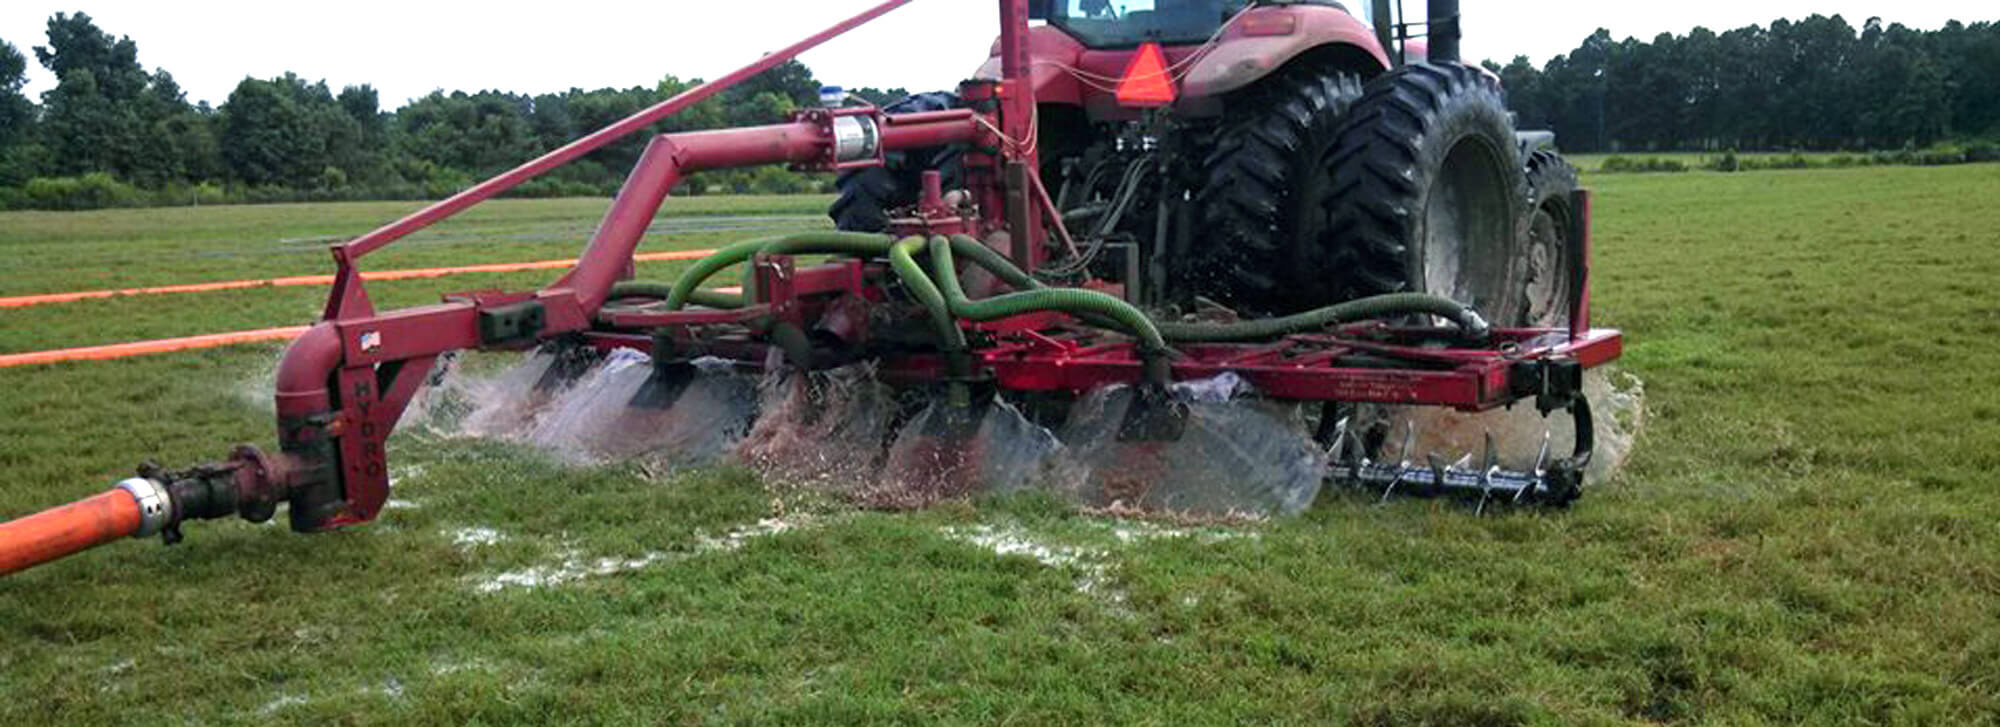 Direct manure injectors behind a large tractor